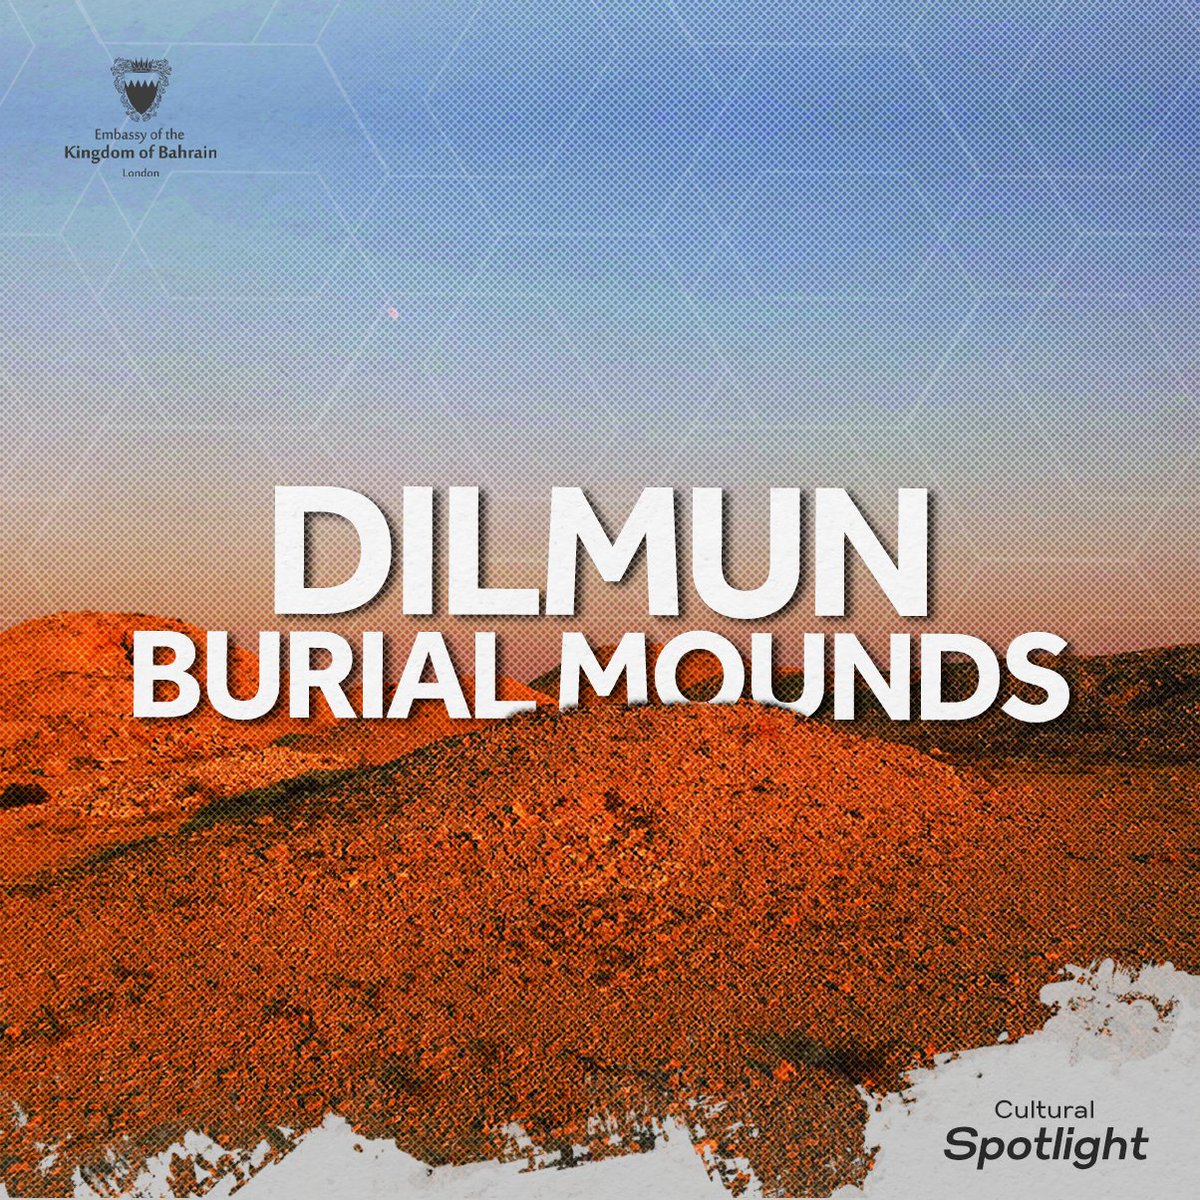 #CulturalSpotlight I #DilmunBurialMounds is a @UNESCO World Heritage Site. Built between 2200 and 1750 BCE, they're evidence of the Early Dilmun civilization, during which #Bahrain 🇧🇭 became a trade hub.

@culturebah 

Read more: bit.ly/3bi48tY